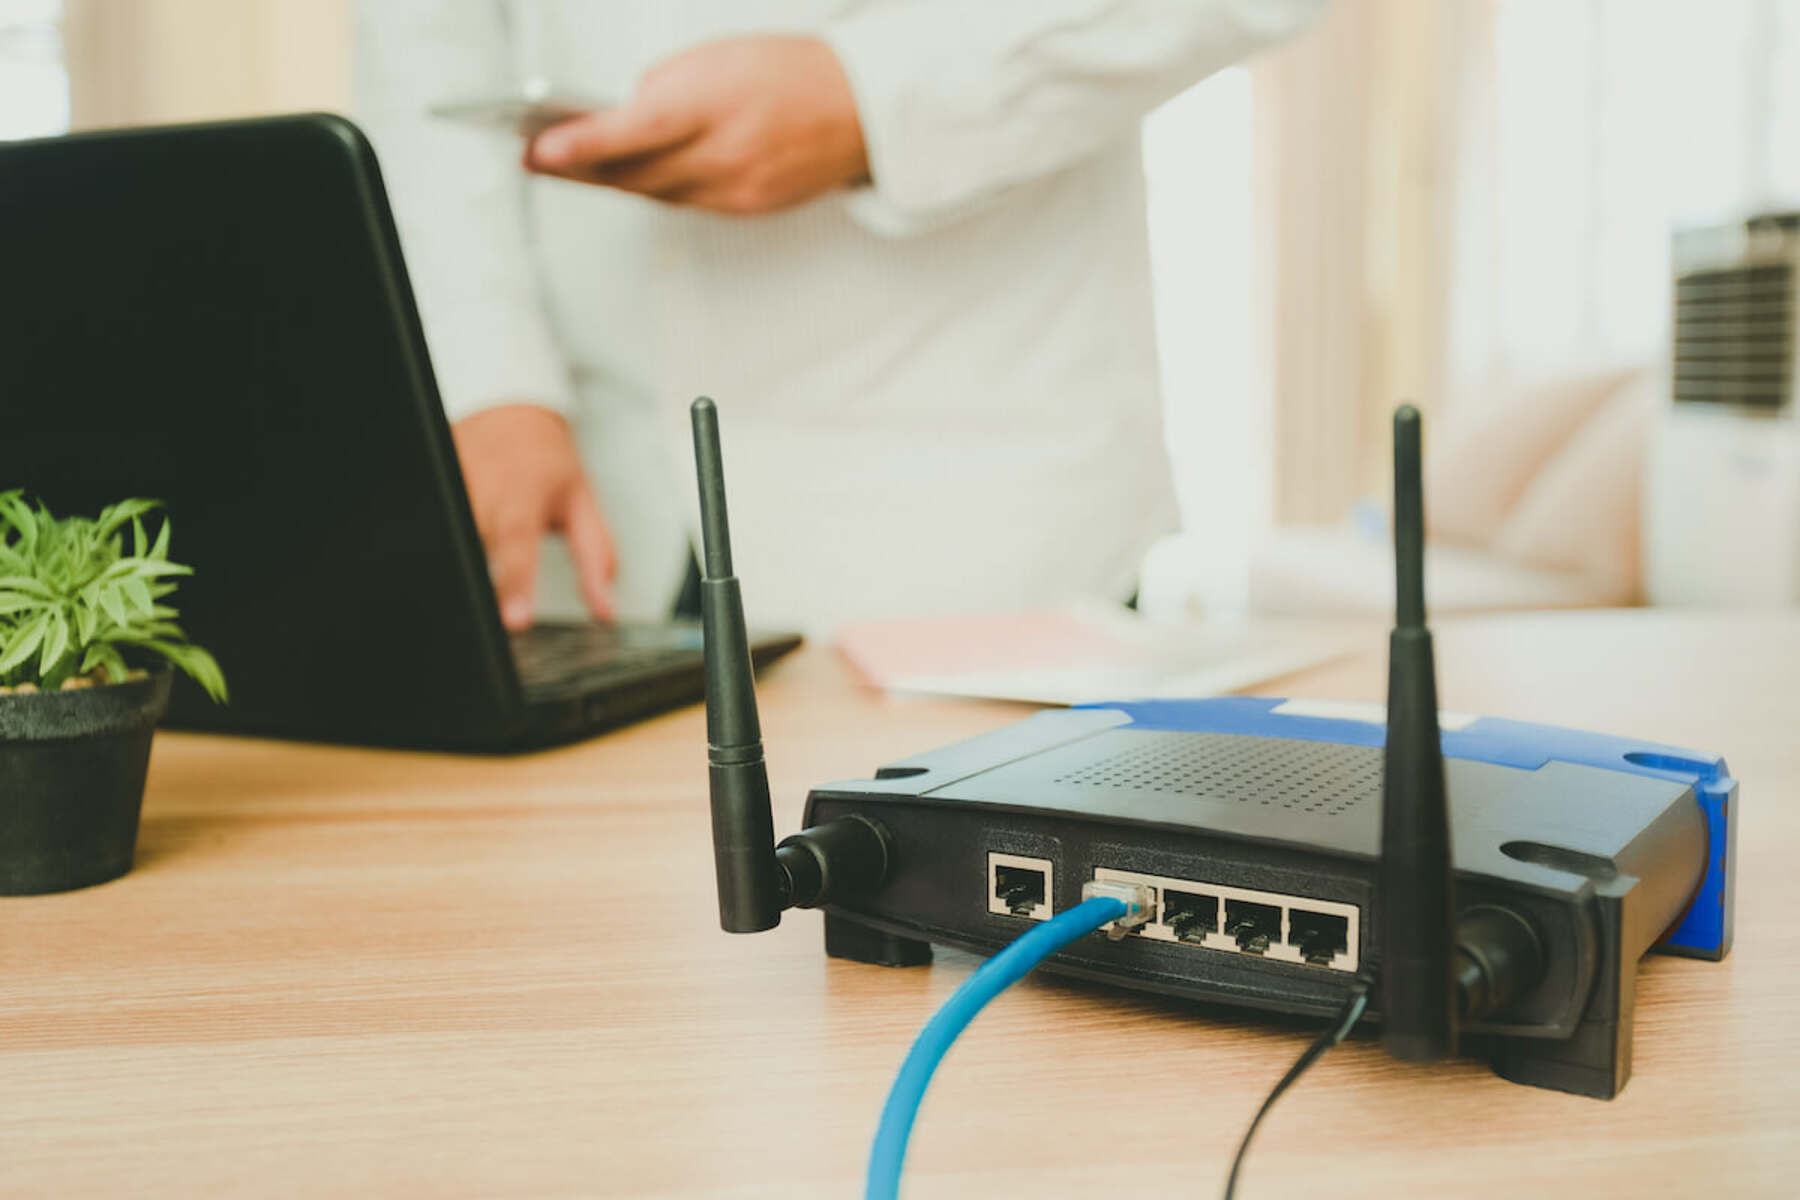 How To See Browser History On Router